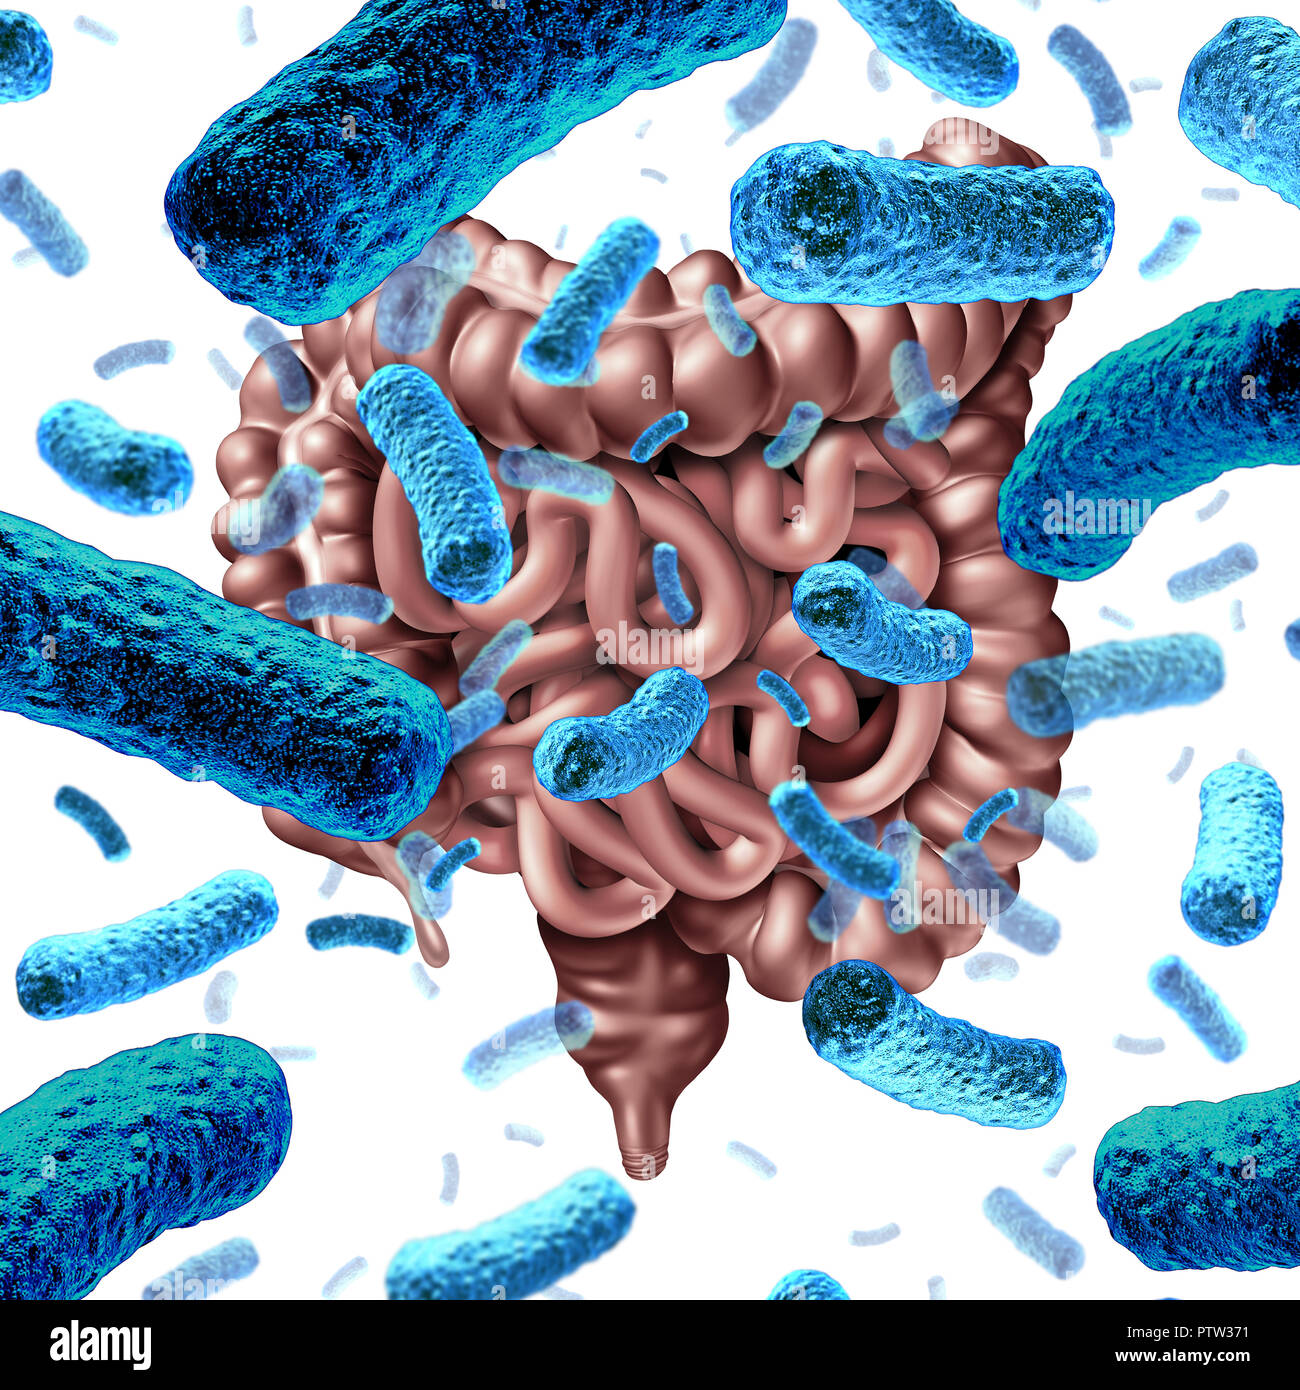 Gut bacteria as probiotic bacterium inside small intestine and digestive microflora inside the colon or bowel as a health symbol for microbiome. Stock Photo